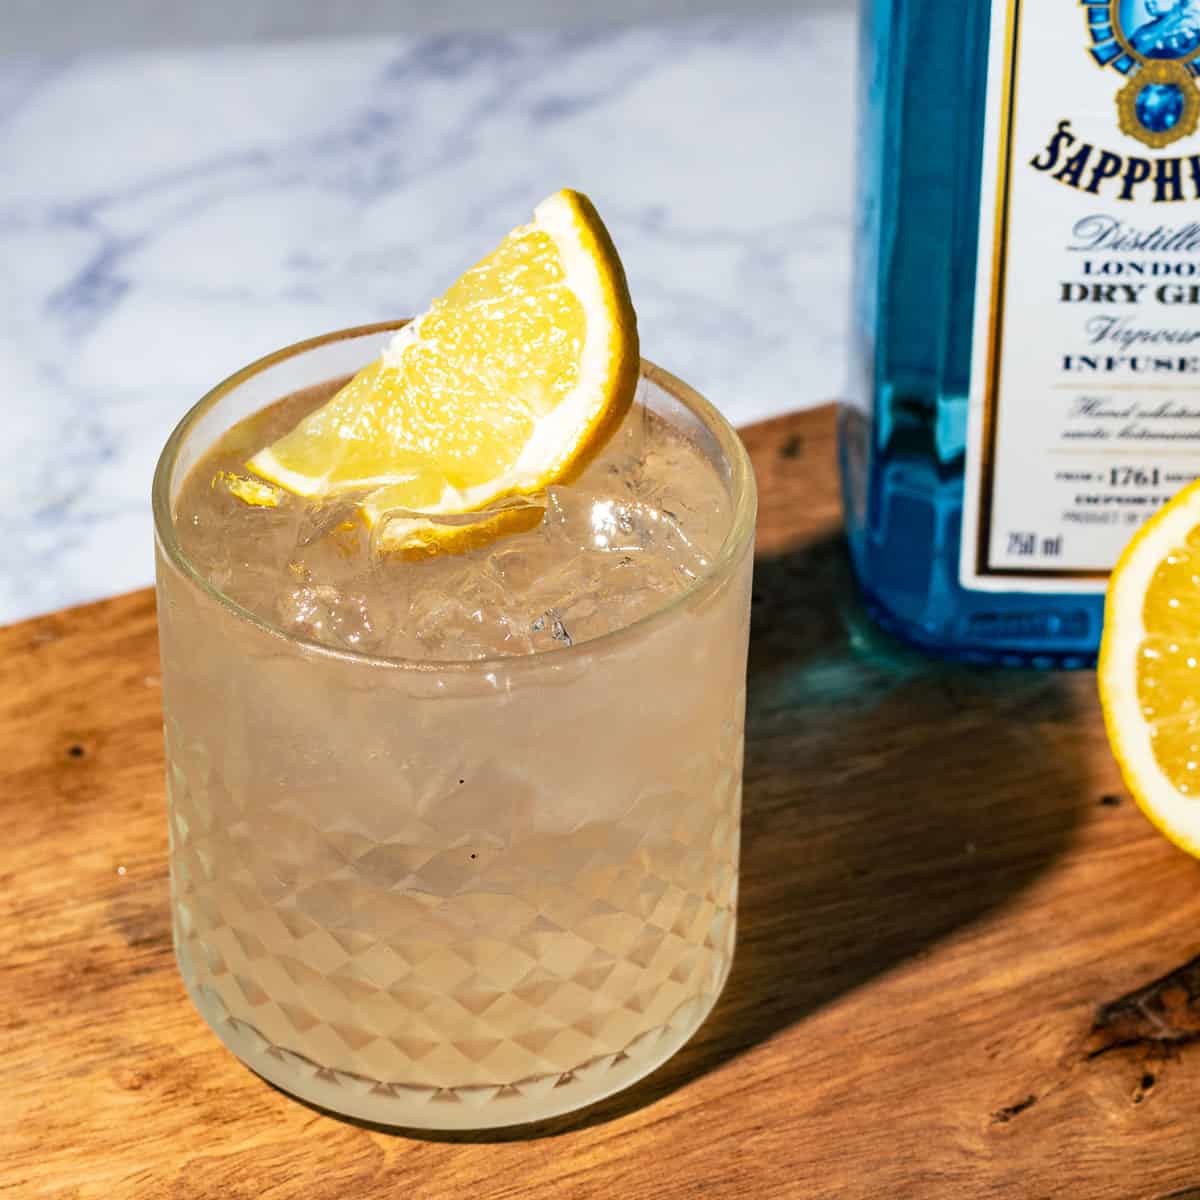 Fitzgerald gin sour garnished with a lemon wedge on wood surface.